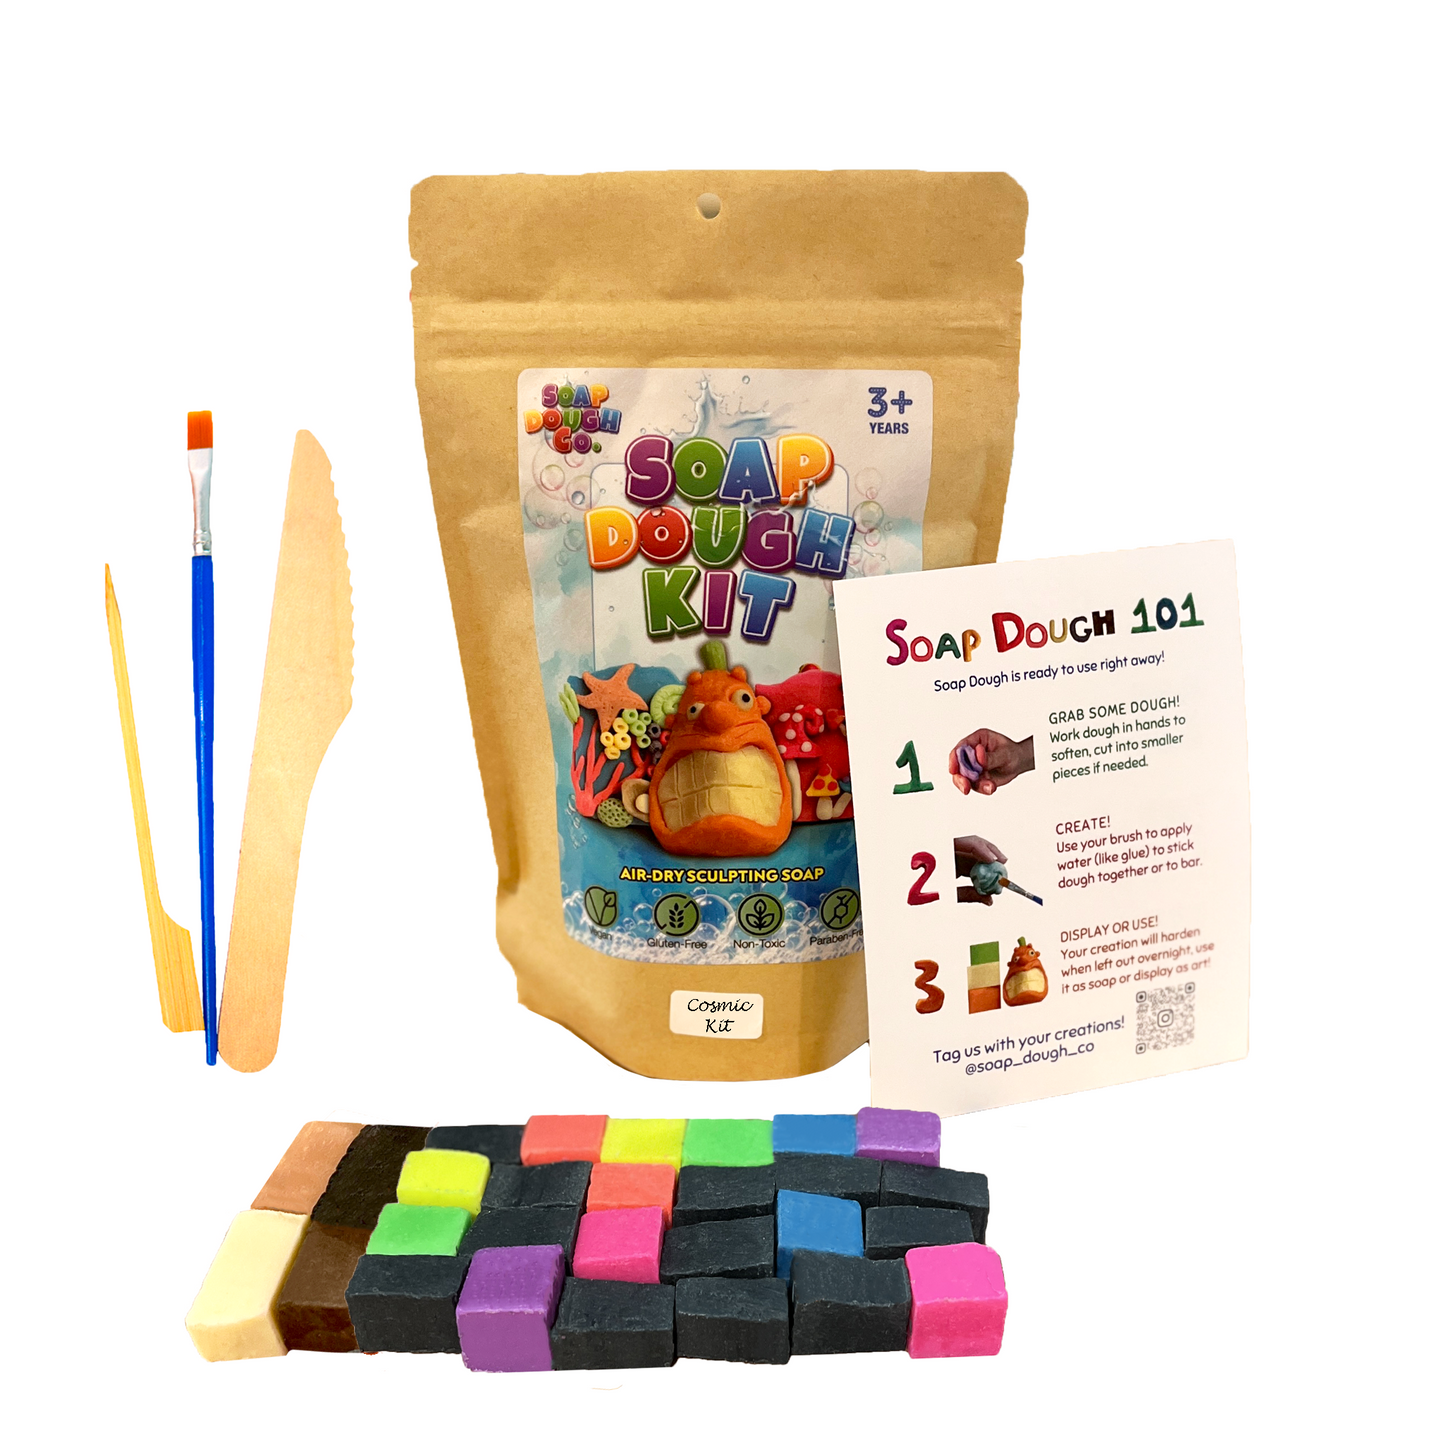 Soap Dough Co. - Cosmic Kit - Wall of neon yellow, purple, green, orange, blue, and pink with majority black soap dough cubes. eco-bag, instructions, and tools next to soap dough cubes with accent colors.